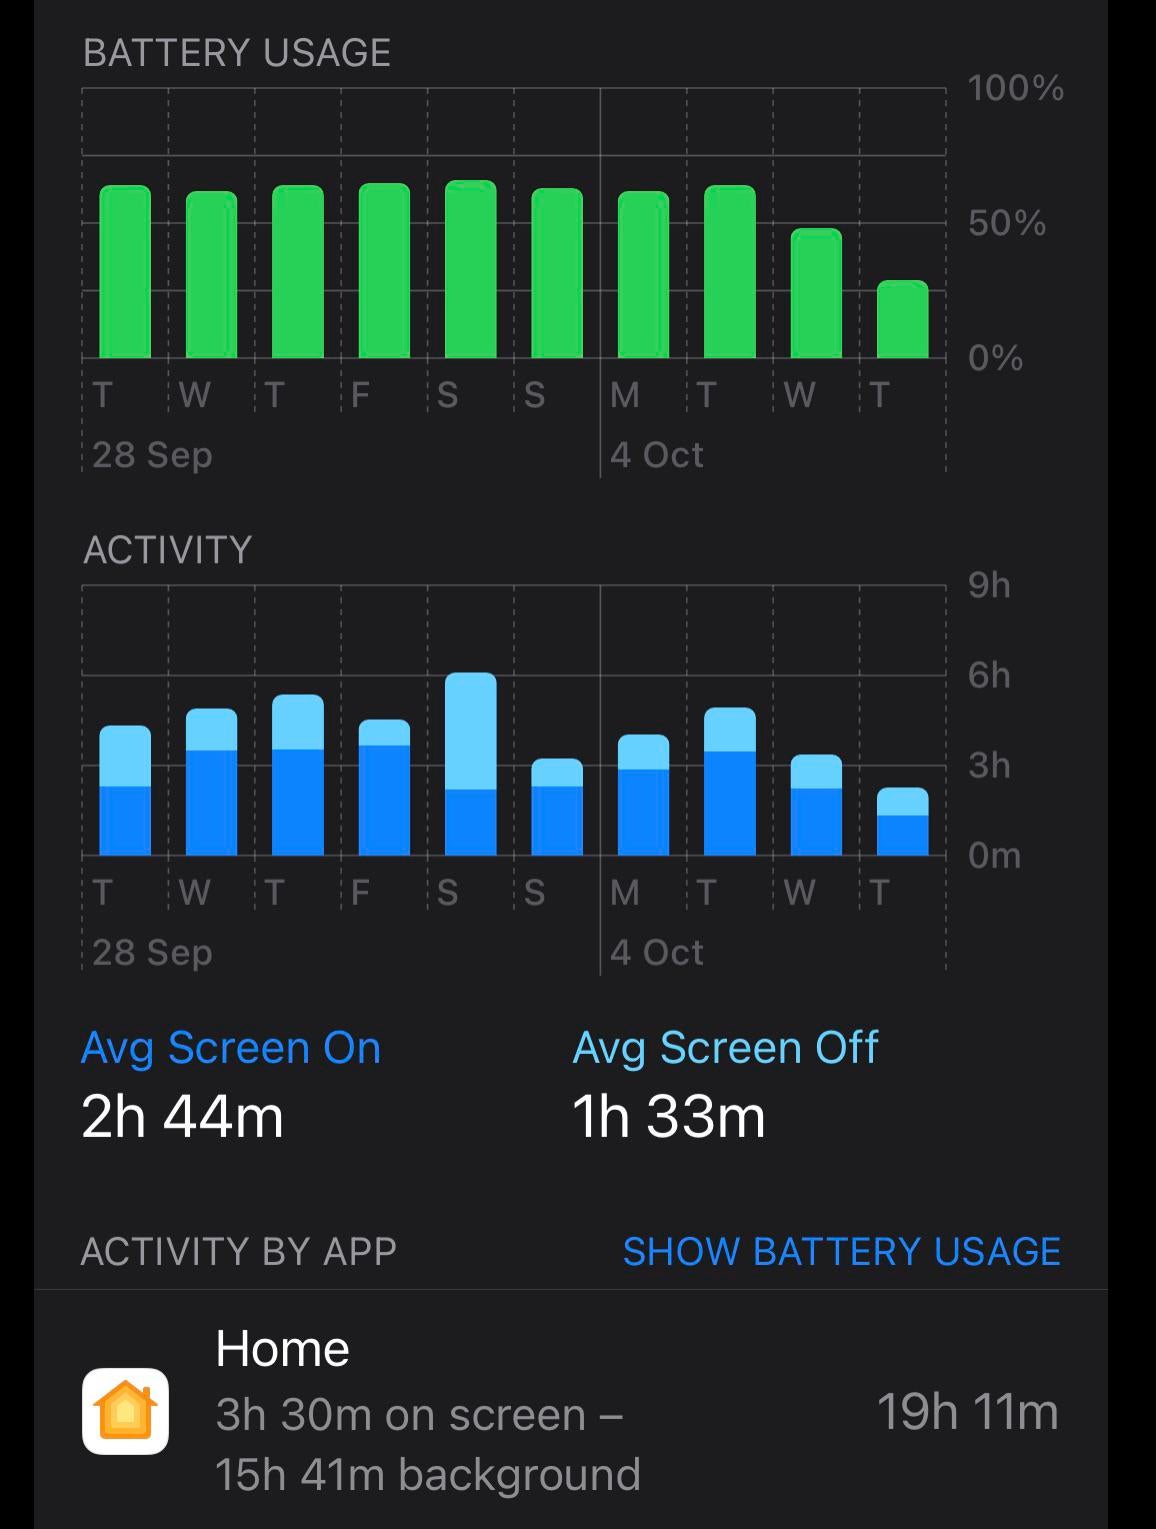 Whats so much about the iPhone battery from Homekit in